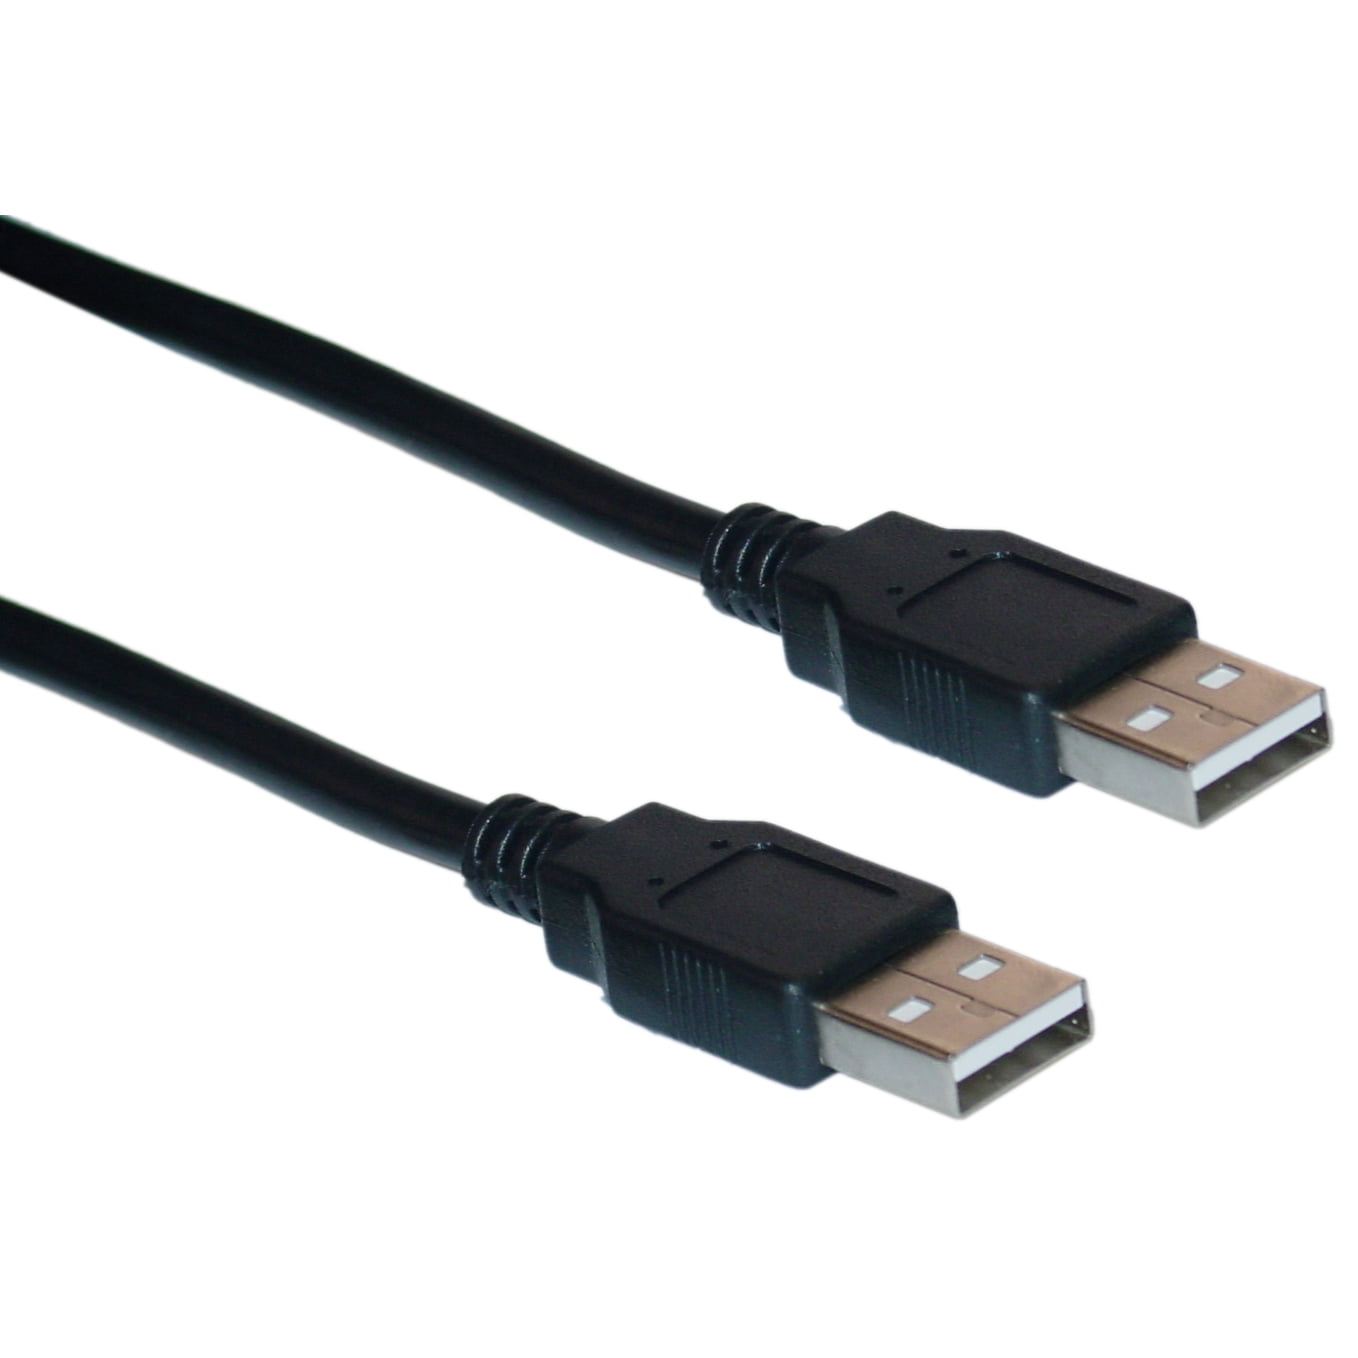 USB 2.0 Type Male to Type Male Cable, Black, 3 foot Walmart.com